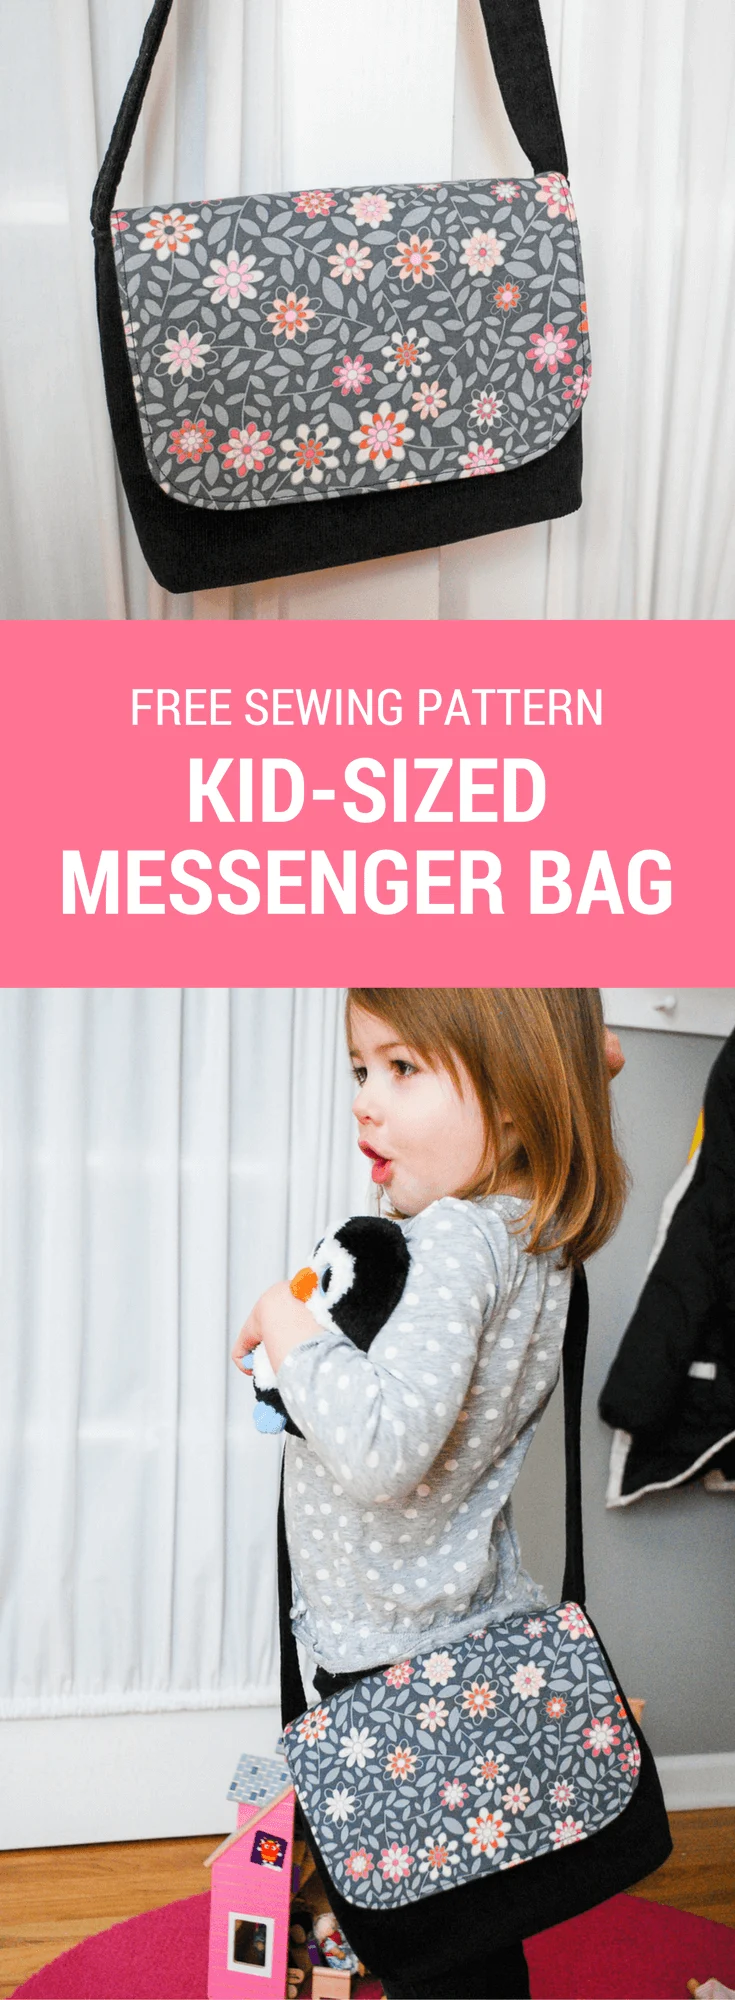 Free sewing pattern for a kid-sized messenger bag. It's an easy DIY sewing project for beginners and makes a great DIY gift for kids!